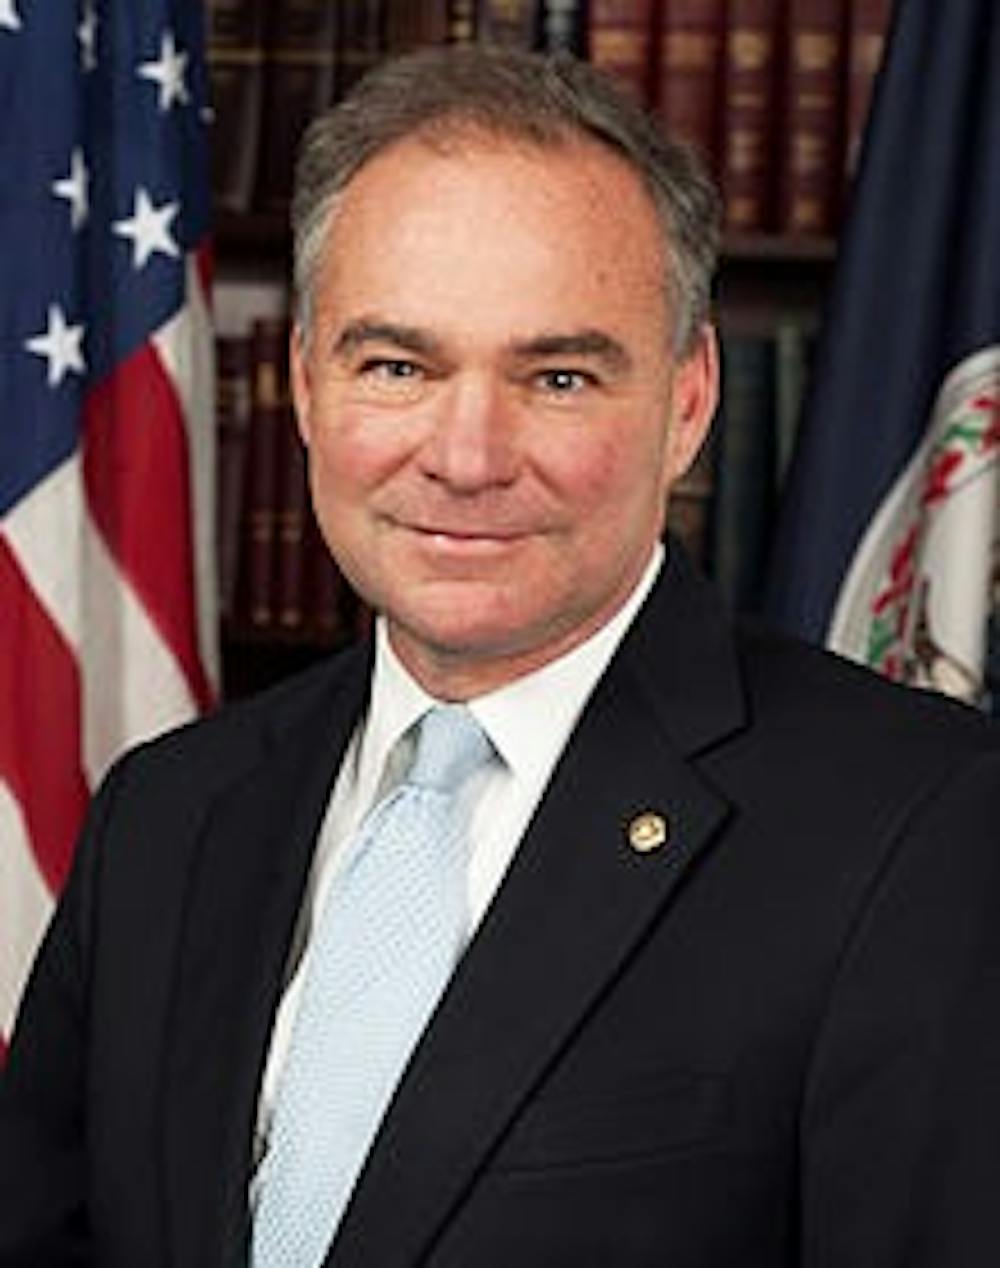 <p>If Clinton is elected president, McAuliffe would appoint someone to fill Kaine's seat until a special election could be held in 2017.&nbsp;</p>